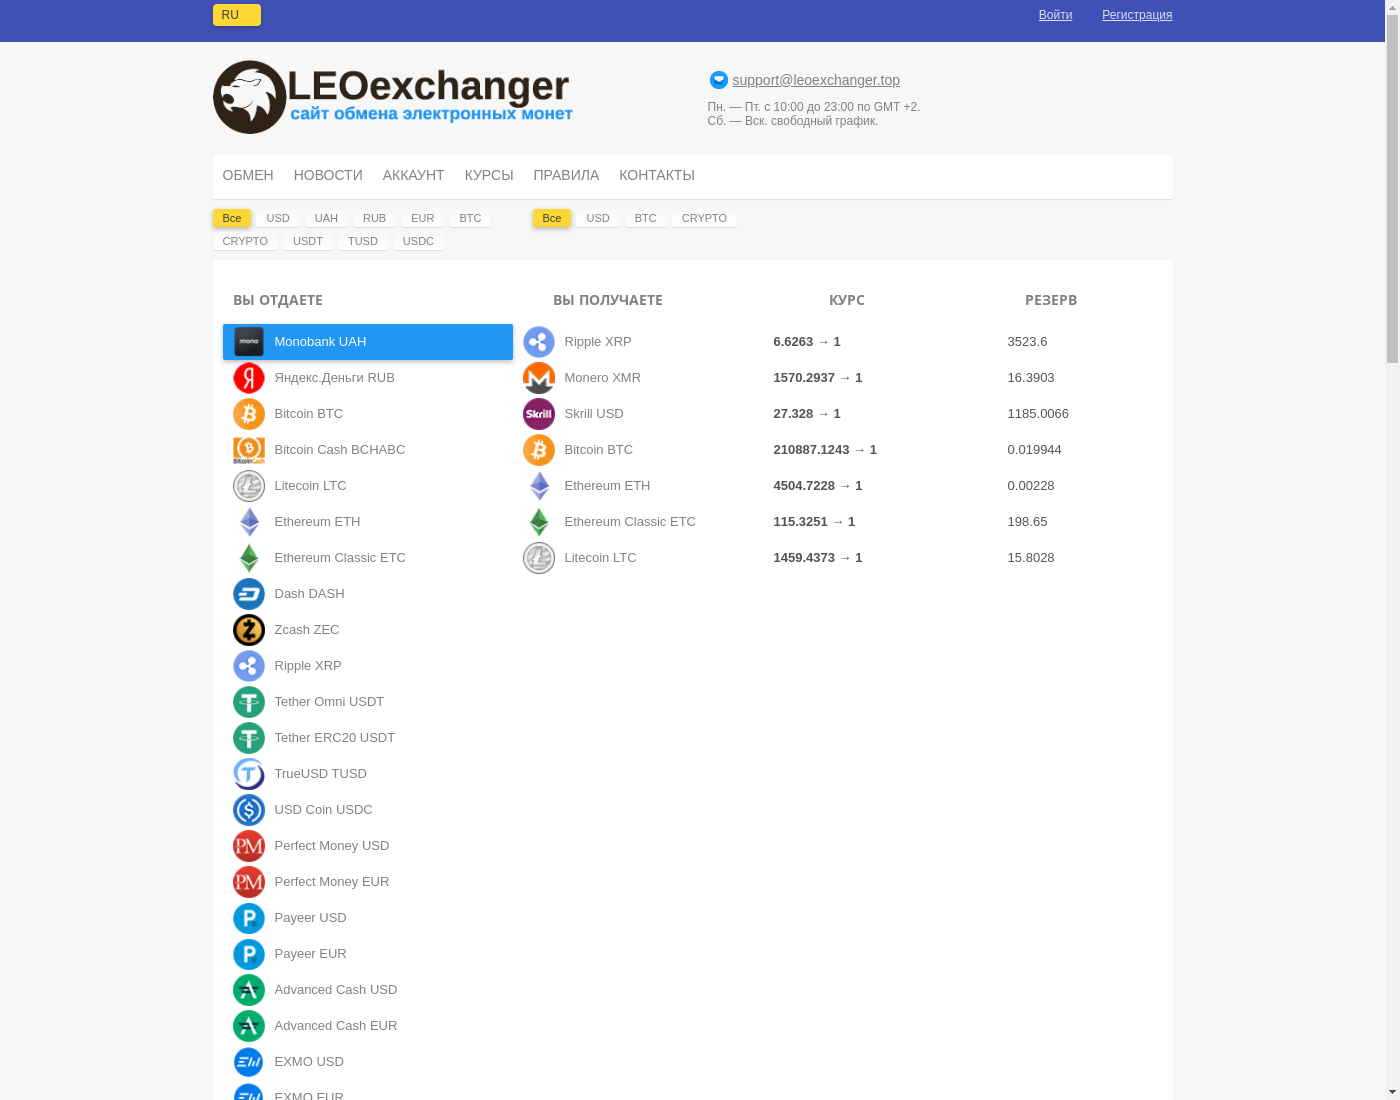 LeoExchanger user interface: the home page in English